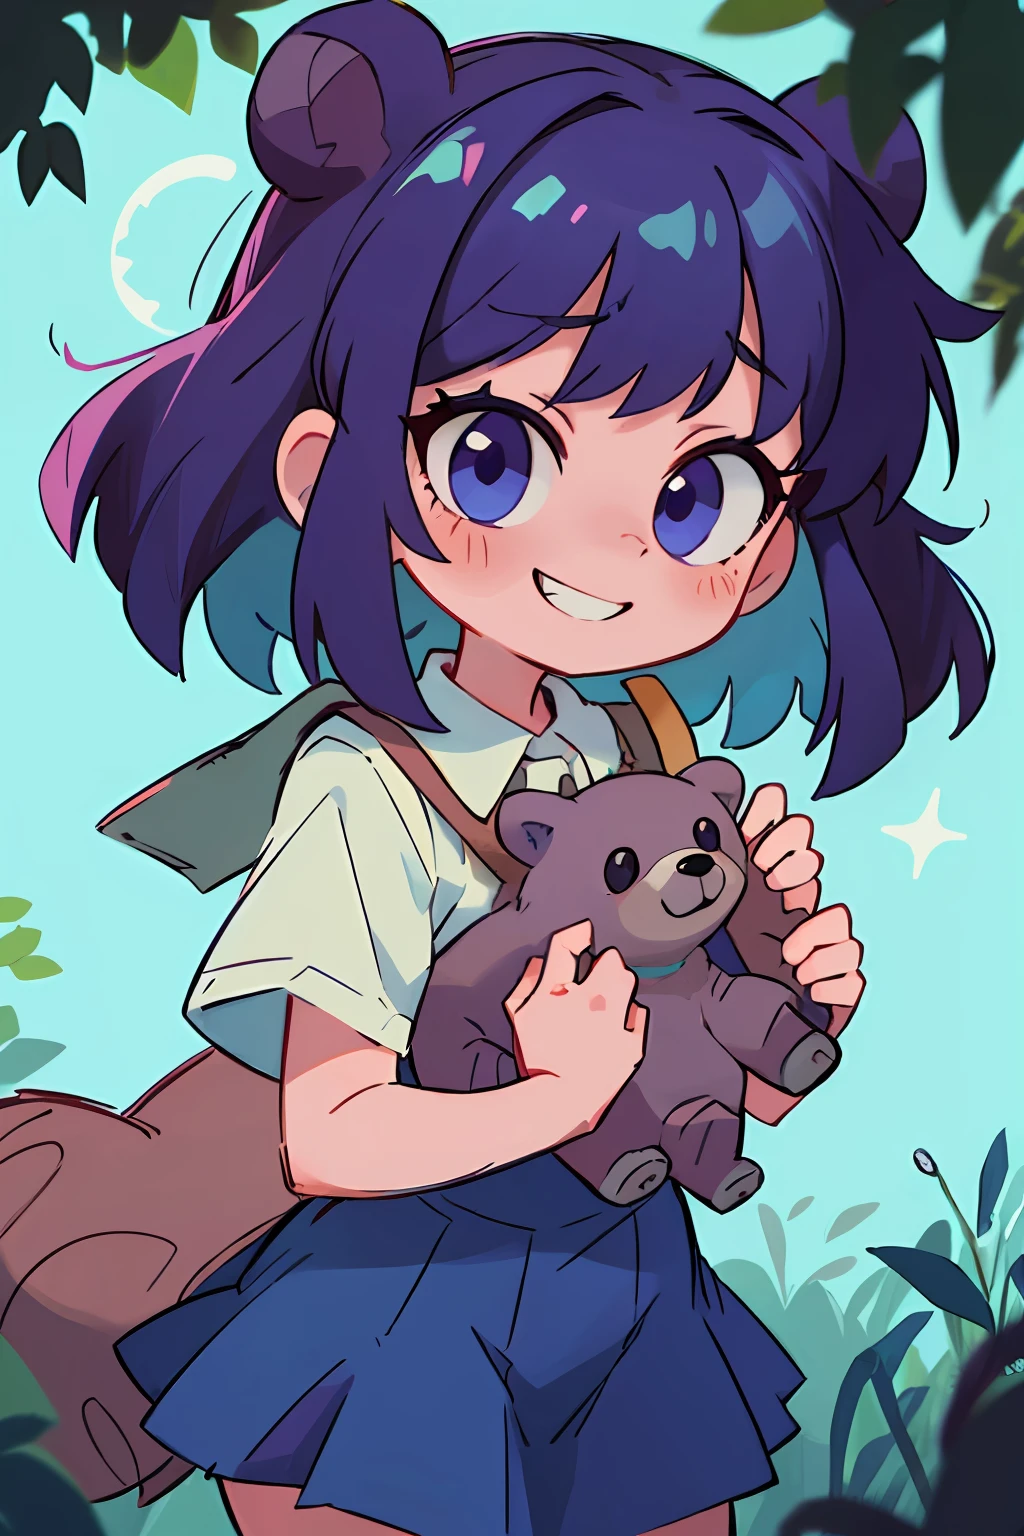 masterpiece, 4k, detailed, extreme detailed, hd, cowboy shot, shirt blue hair, thick bangs, wild bangs, beautiful eyes, detailed eyes, beautiful detailed purple eyes,  outfit, school girl, holding bear, holding bear over face and chest, holding stuffed bear, holding stuffed animal, bright cyan hair,, blue underglow on hair, toothy grin, sad bucktooth grin